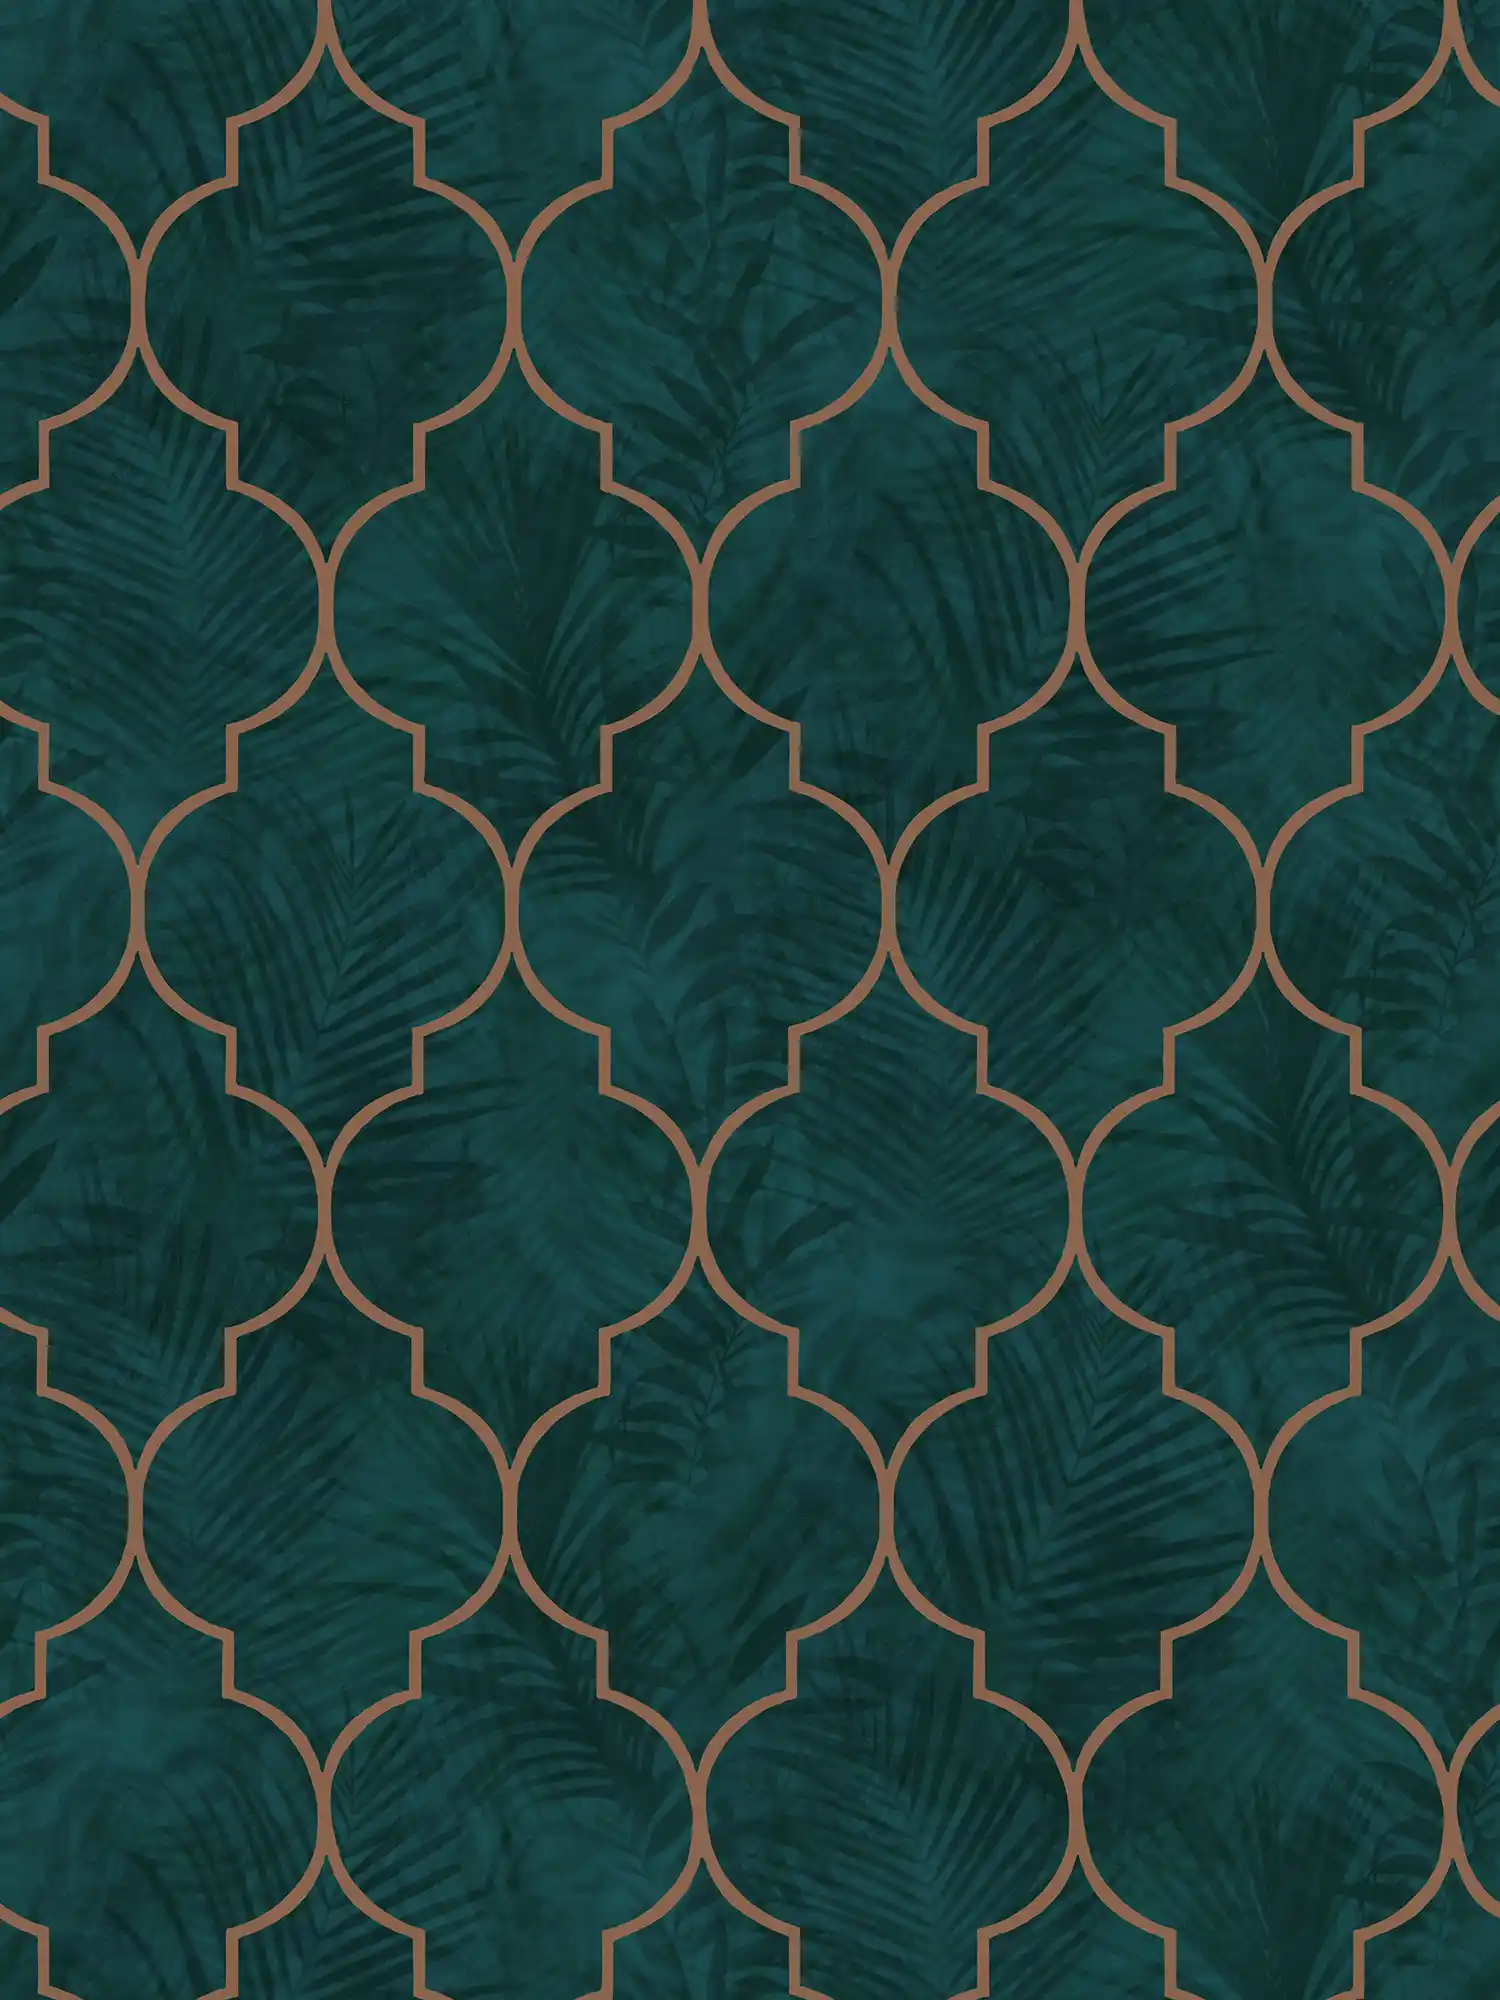 Tile wallpaper with ornament and leaf pattern - green, turquoise, brown
